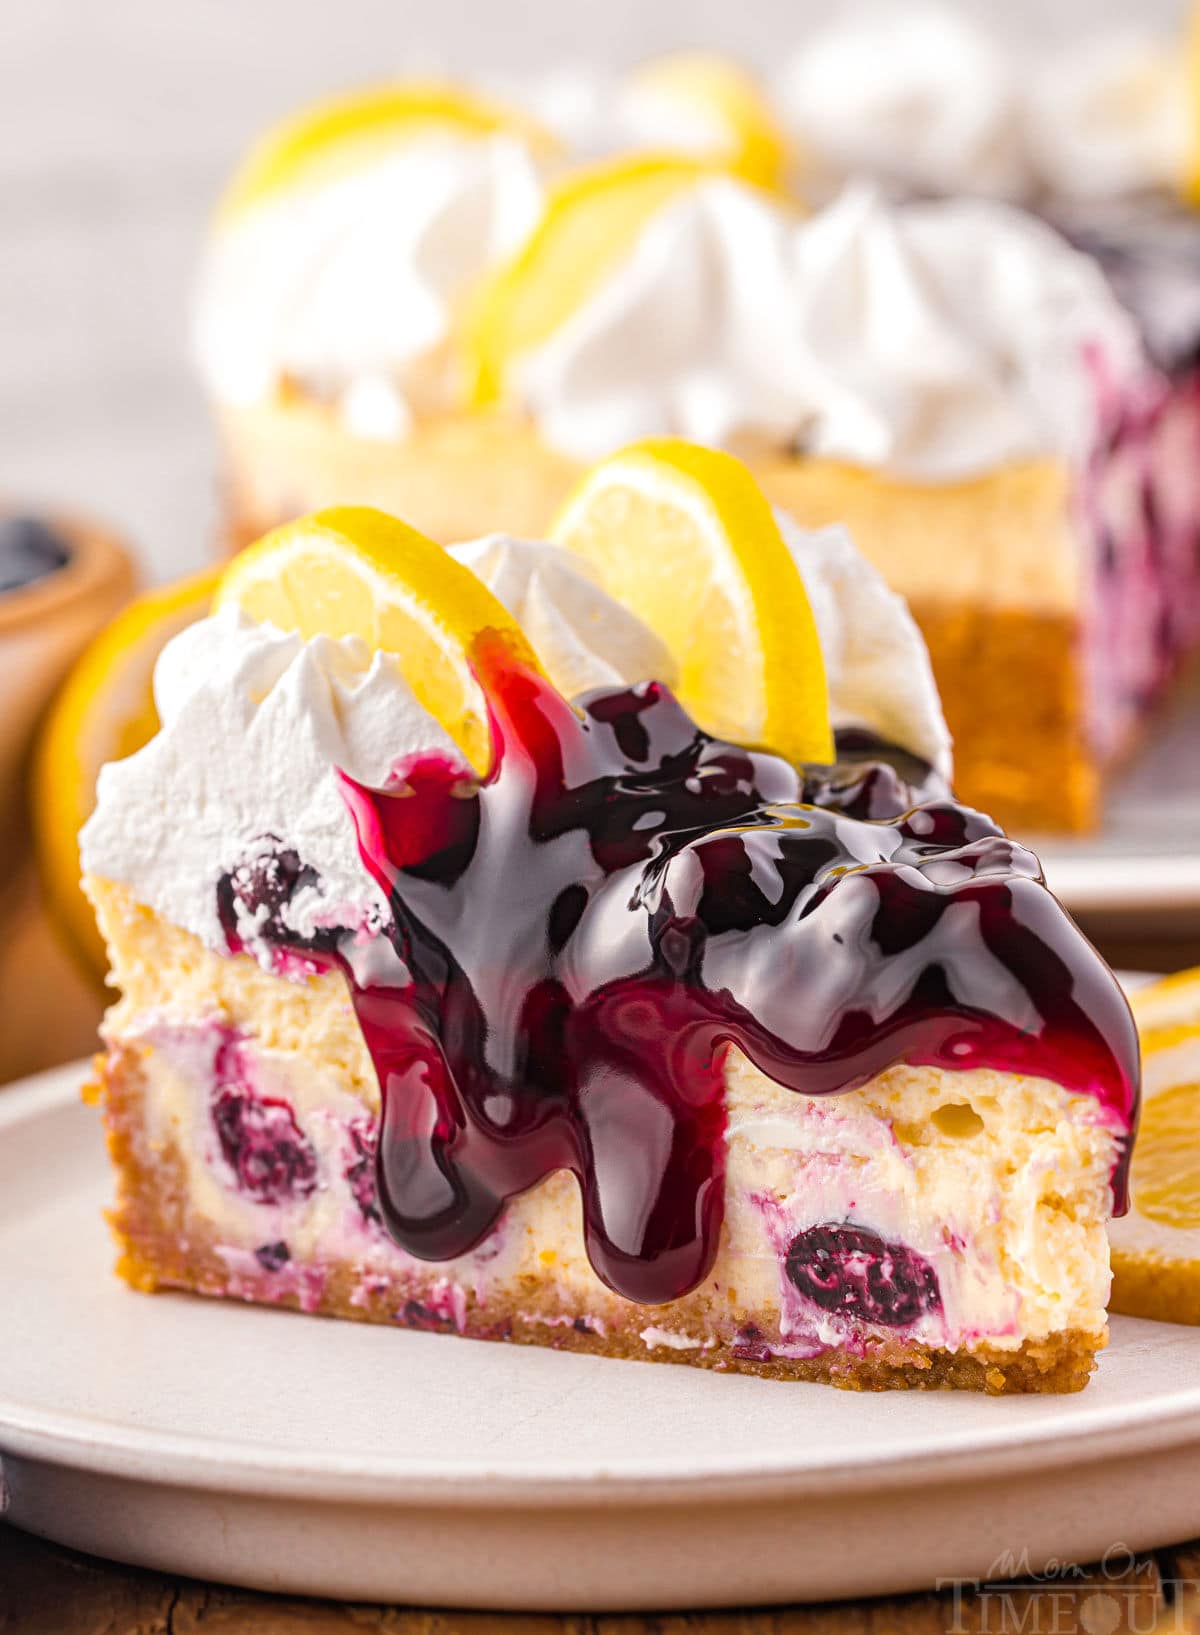 side view of lemon blueberry cheesecake topped with blueberry pie filling and fresh whipped cream. the rest of the cheesecake can be seen in the background.